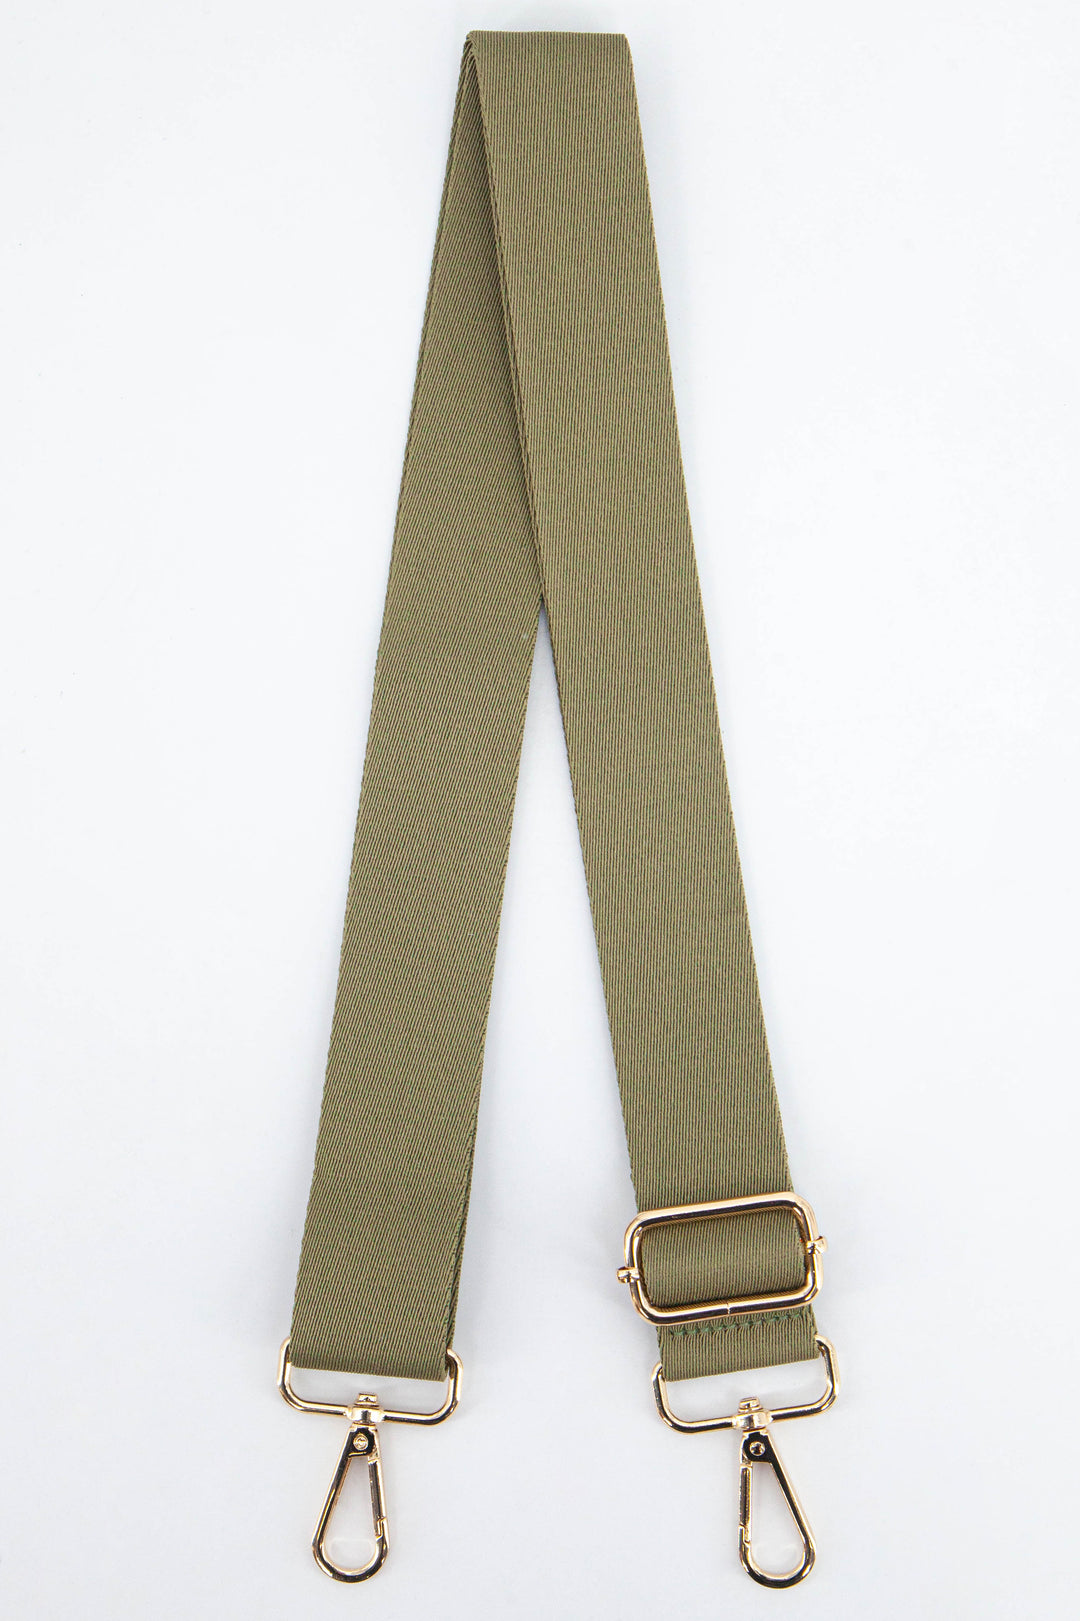 plain khaki green clip on bag strap in a textured orange woven material with gold hardware